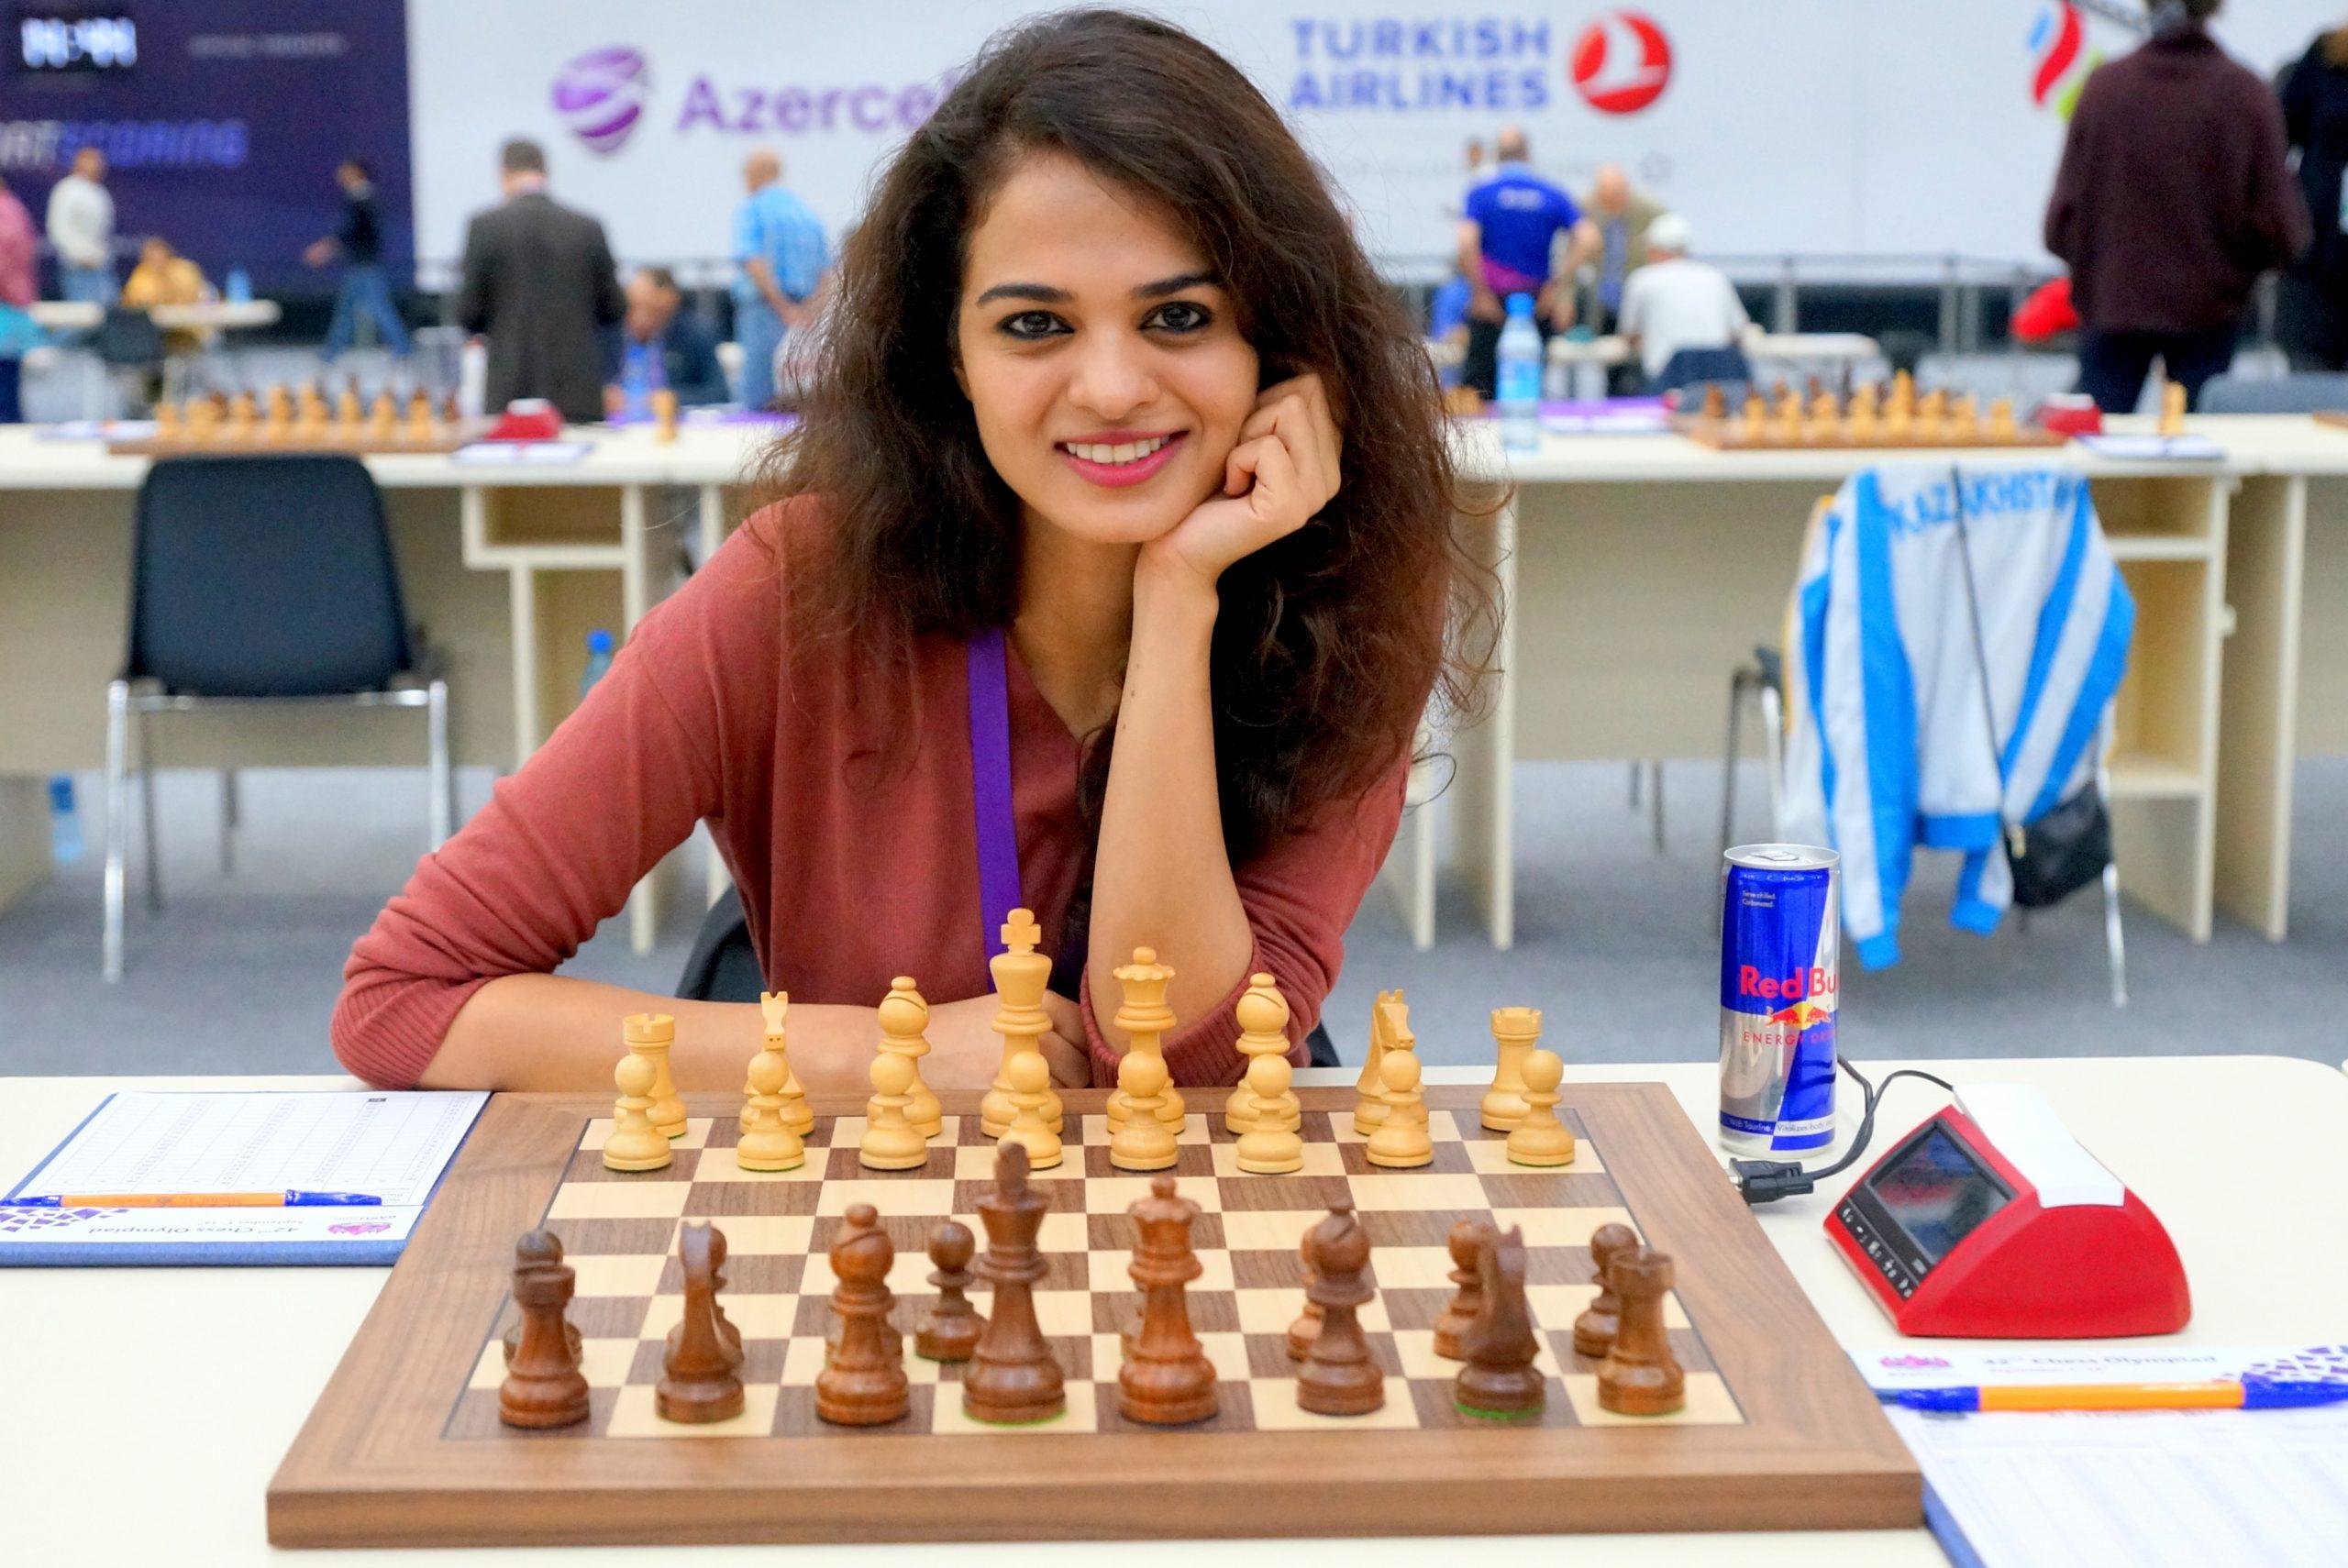 The winners of the 44th Chess Olympiad (Women's Tournament